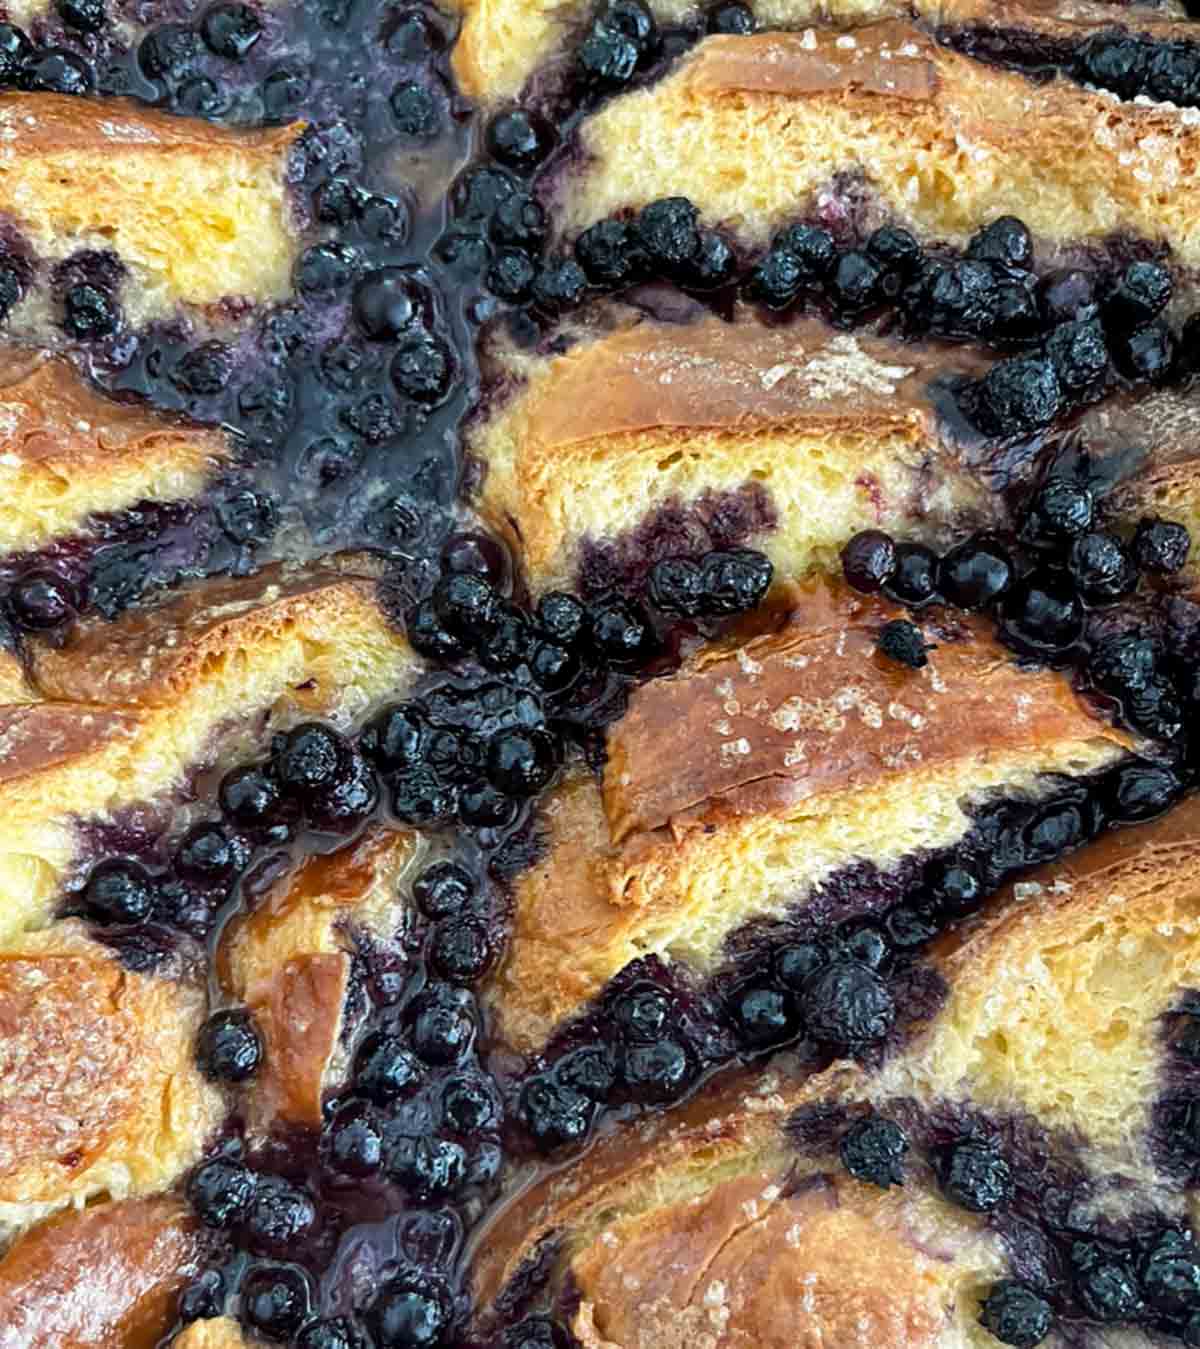 A close-up view of blueberry brioche French toast casserole.